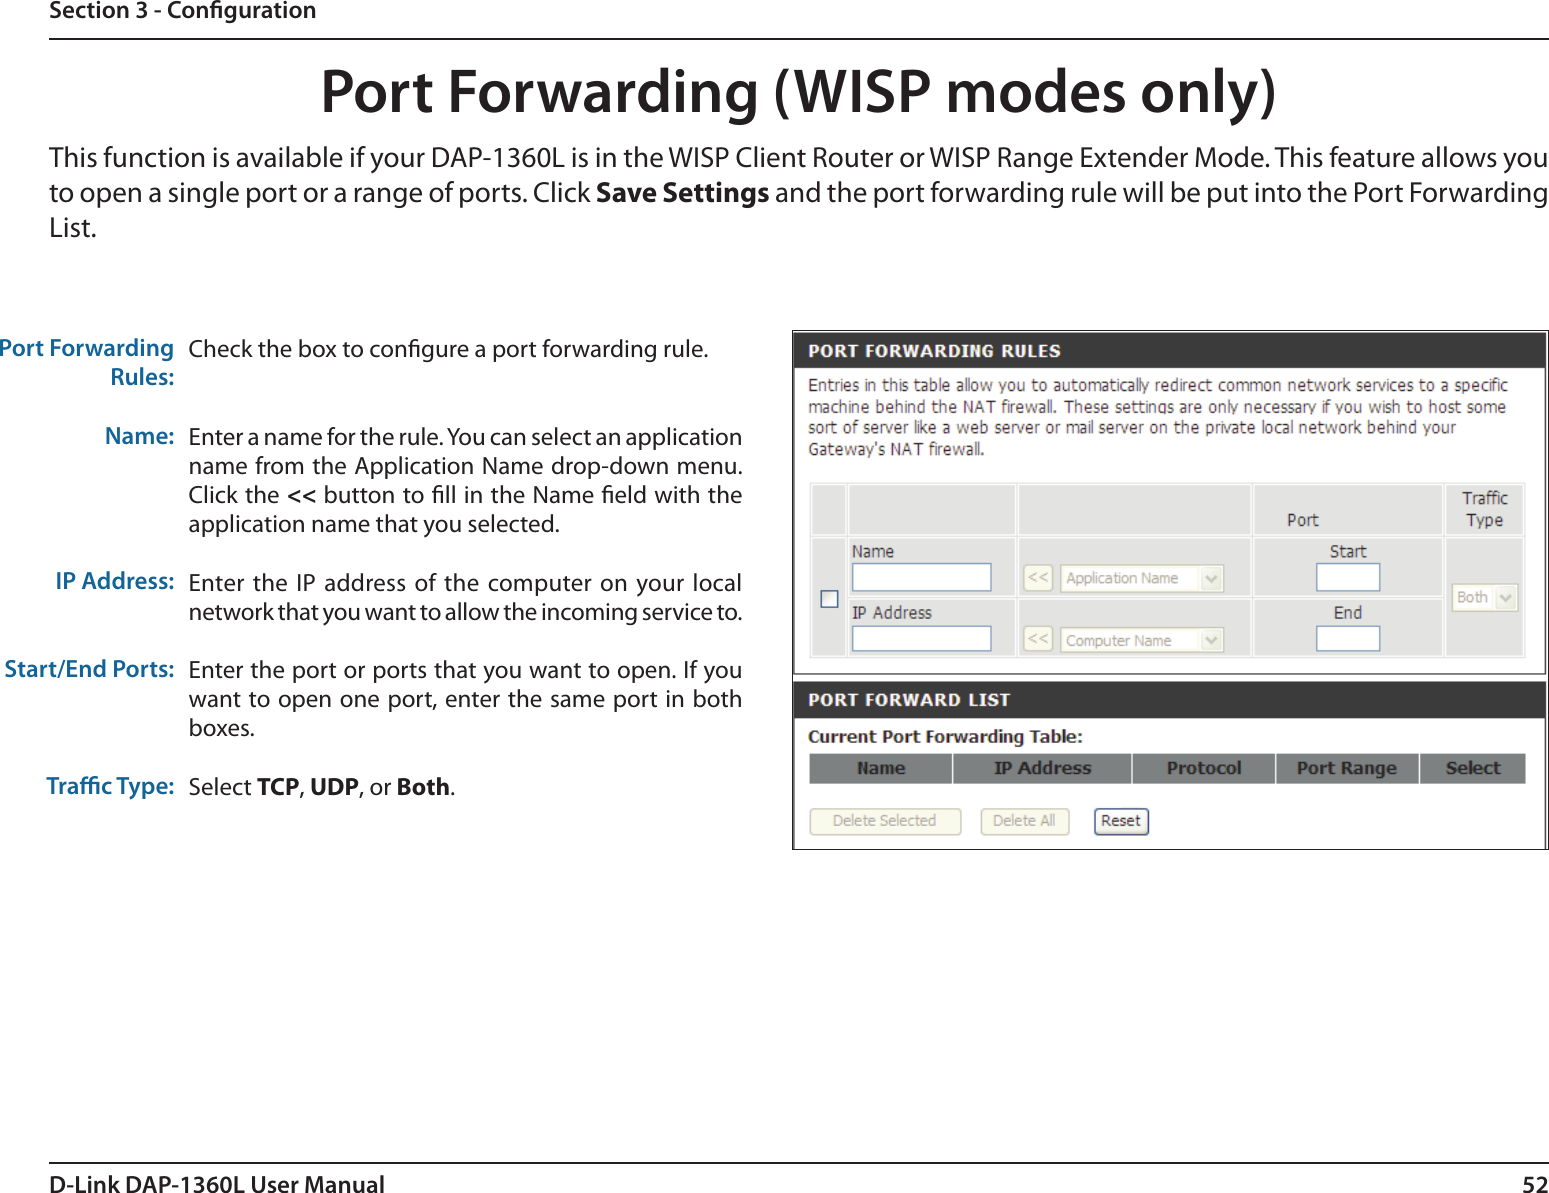 52D-Link DAP-1360L User ManualSection 3 - CongurationPort Forwarding (WISP modes only)Check the box to congure a port forwarding rule.Enter a name for the rule. You can select an application name from the Application Name drop-down menu. Click the &lt;&lt; button to ll in the Name eld with the application name that you selected.Enter the IP  address of  the  computer  on your  local network that you want to allow the incoming service to. Enter the port or ports that you want to open. If you want to open one port, enter the same port in both boxes.Select TCP, UDP, or Both.Port ForwardingRules:Name:IP Address:Start/End Ports:Trac Type:This function is available if your DAP-1360L is in the WISP Client Router or WISP Range Extender Mode. This feature allows you to open a single port or a range of ports. Click Save Settings and the port forwarding rule will be put into the Port Forwarding List.